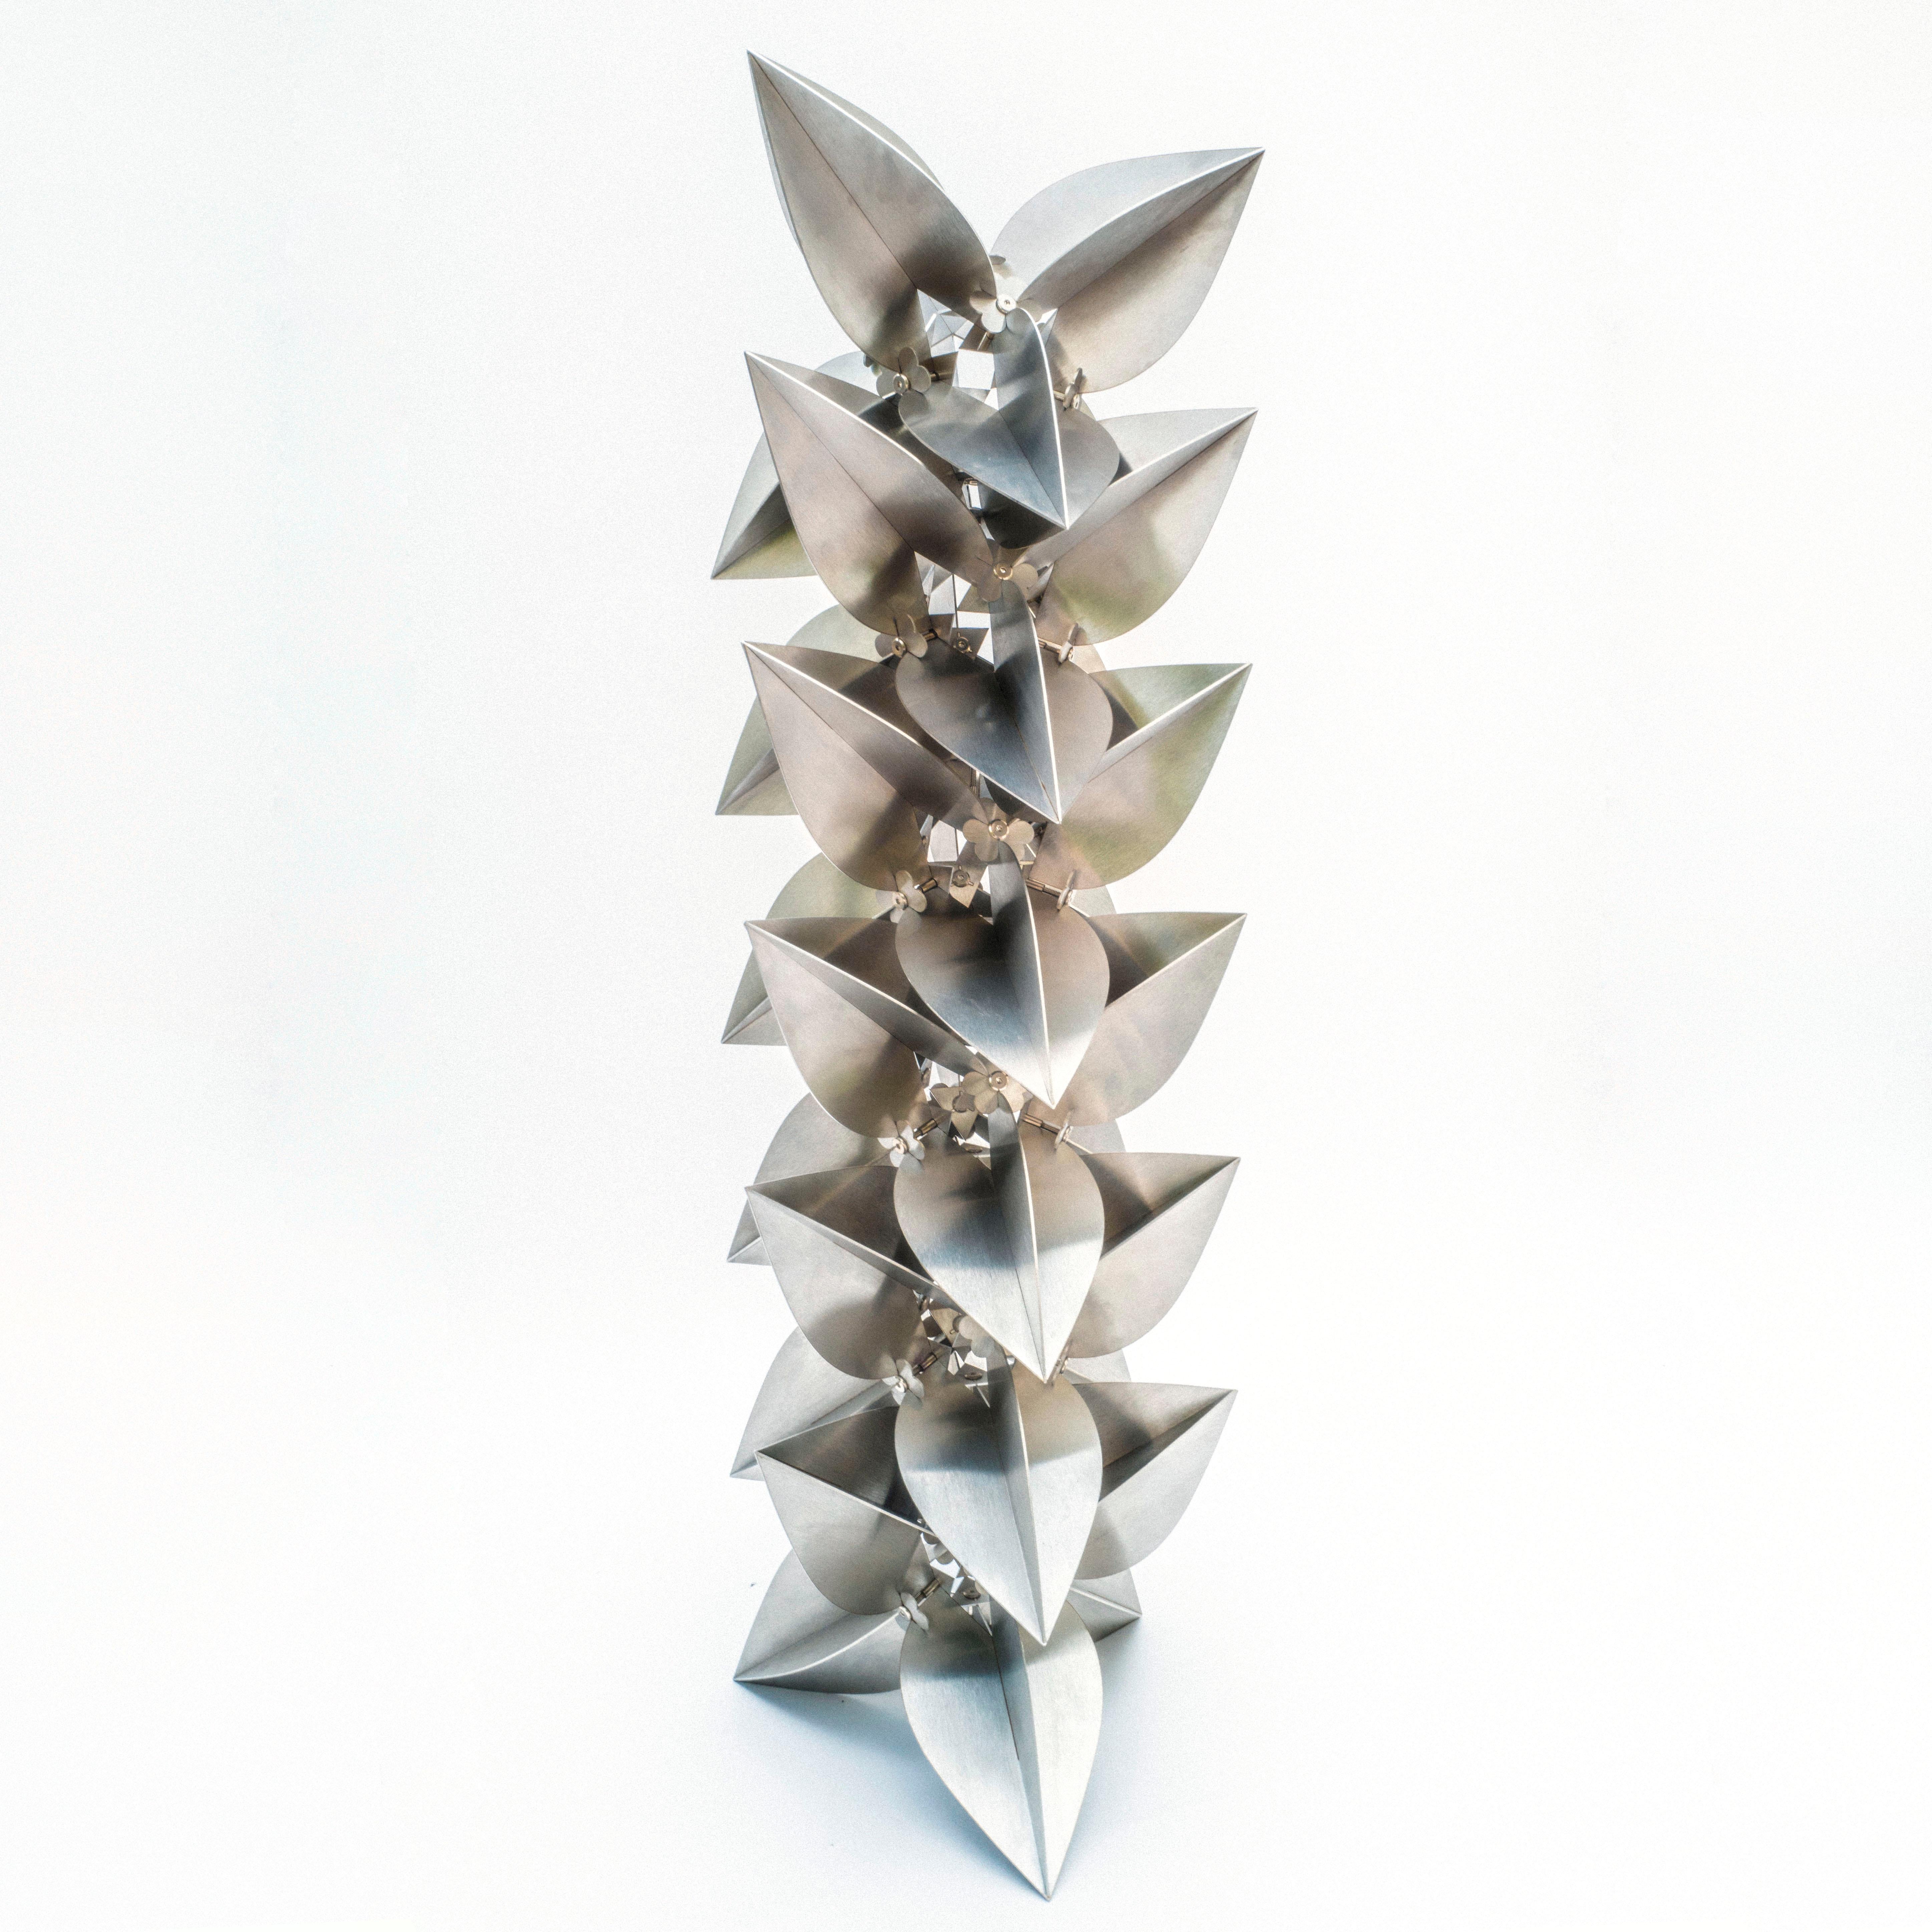 Polished Bugambilia, Multifunctional Geometric Stainless Steel Modular Sculpture For Sale